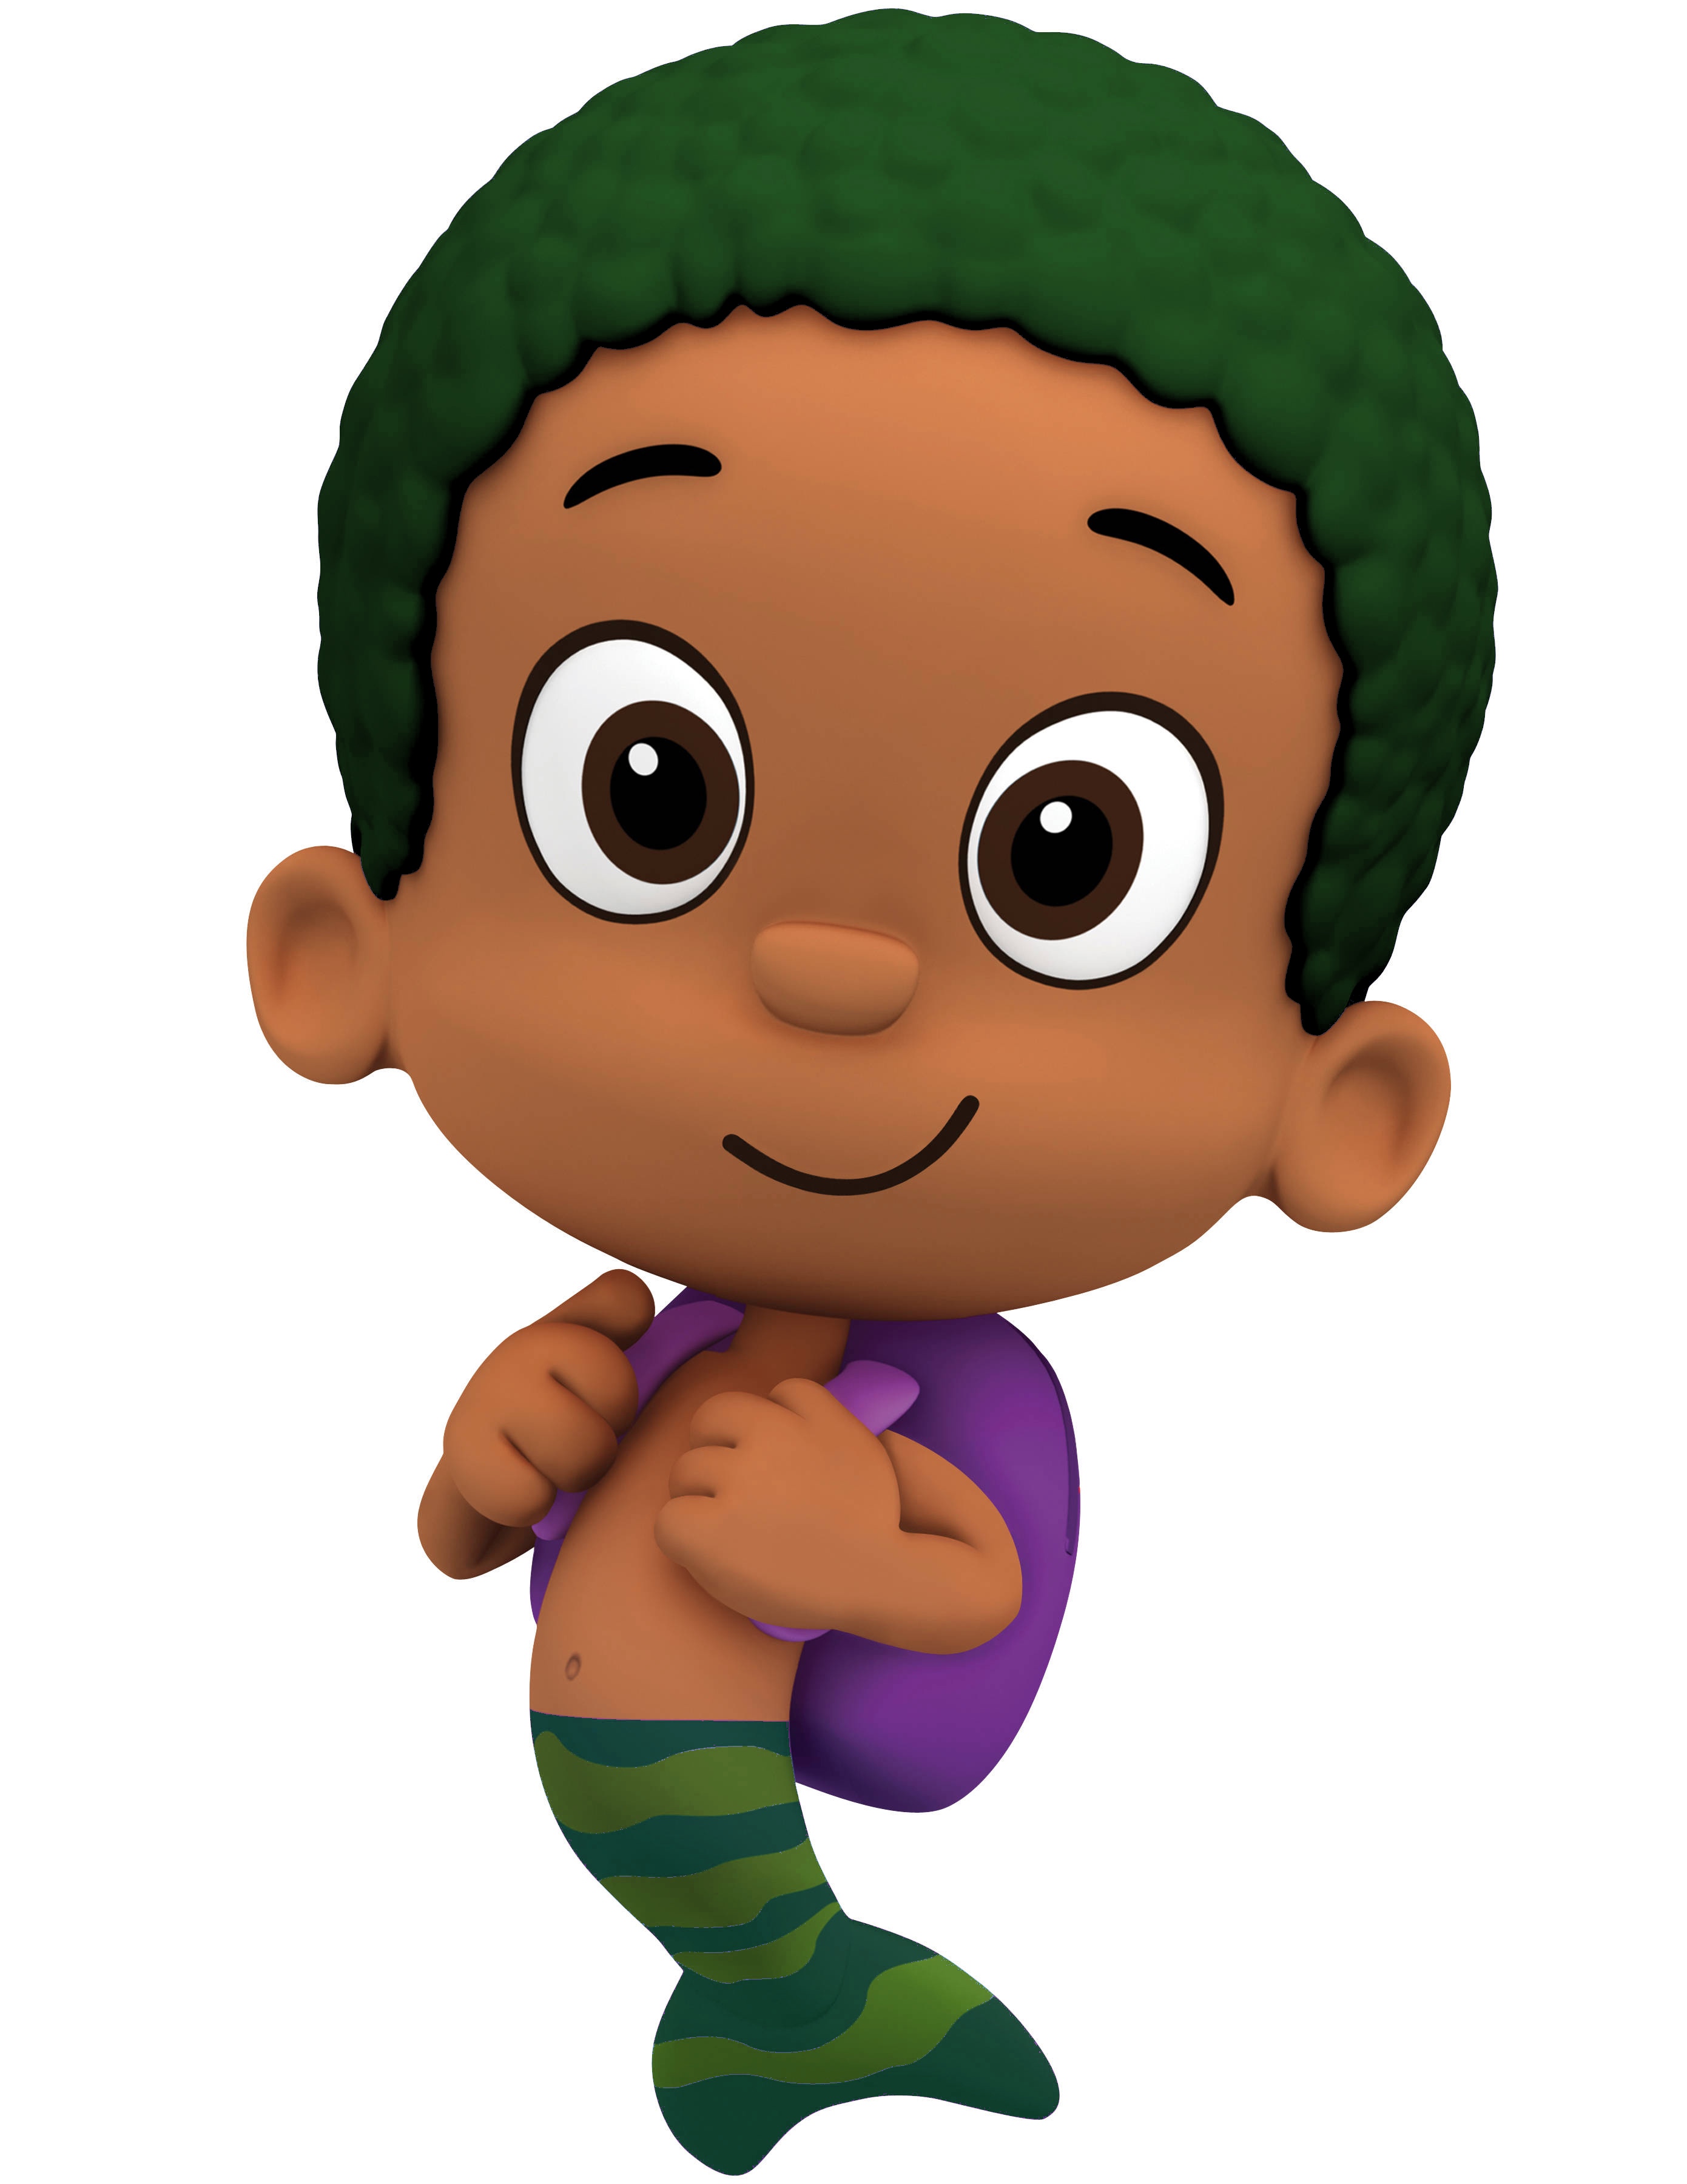 bubble guppies characters